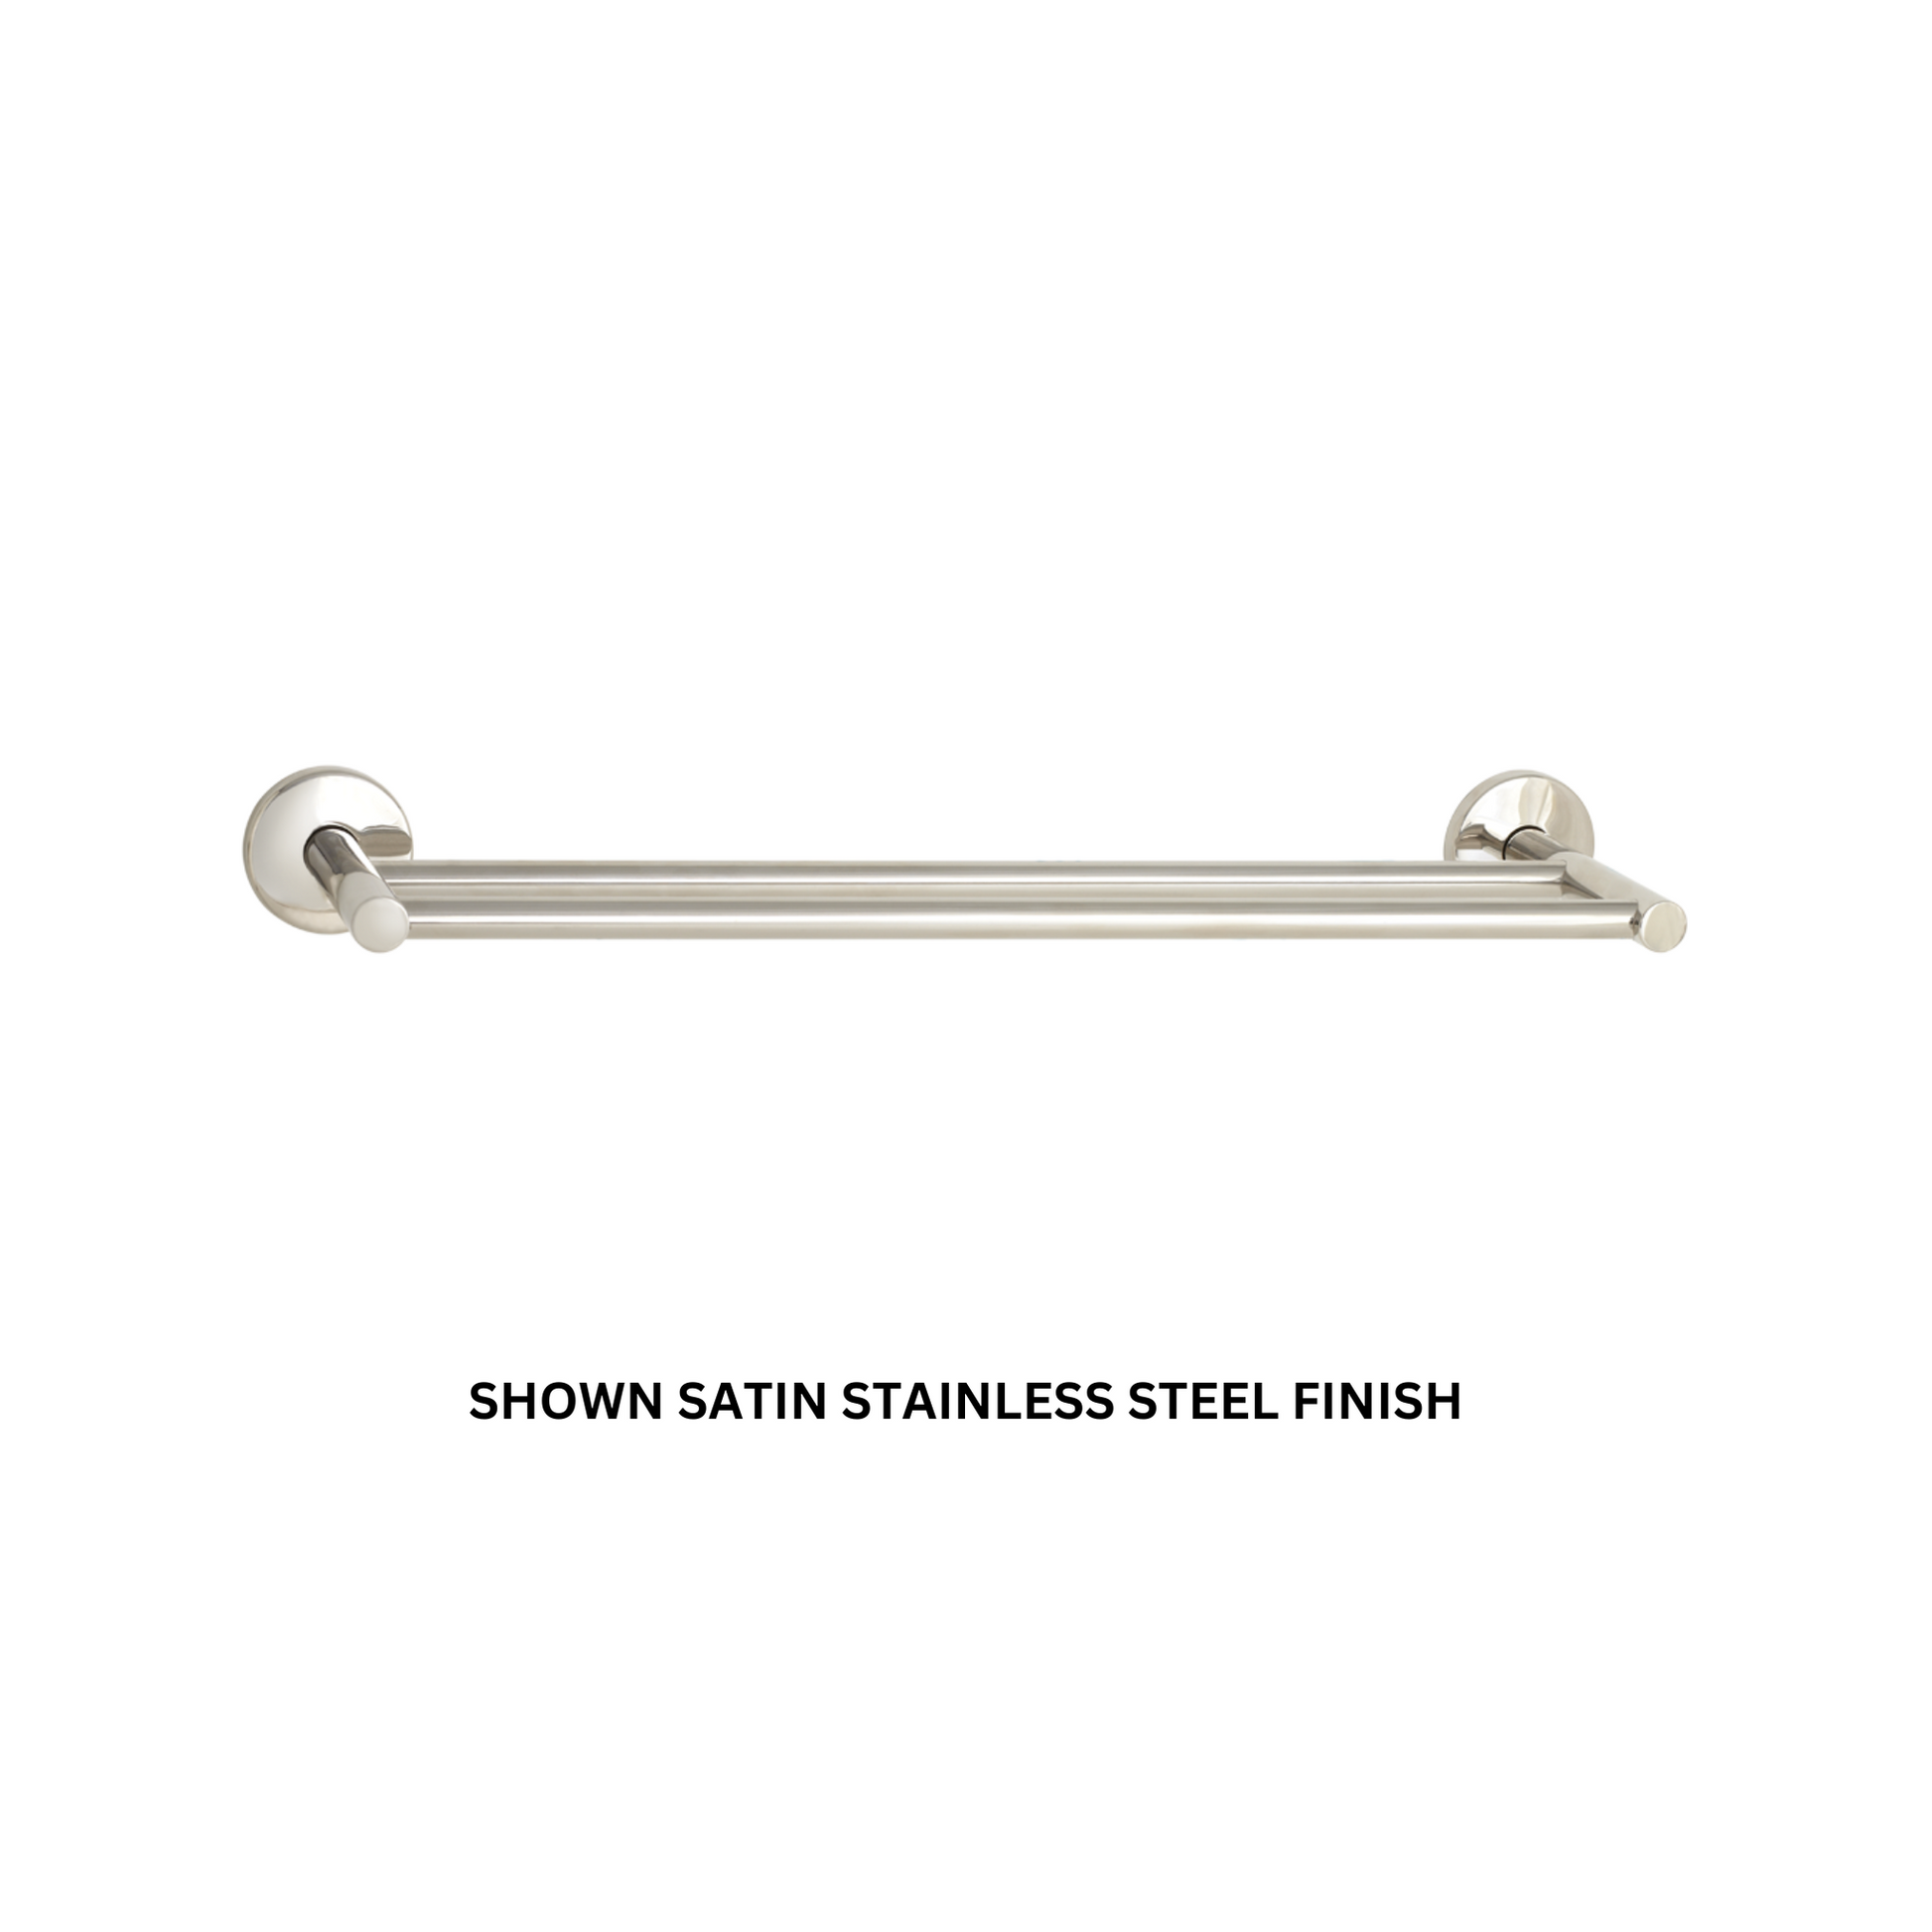 Seachrome Conorado Series 24" Black Powder Coat Concealed Mounting Flange Double Towel Bar